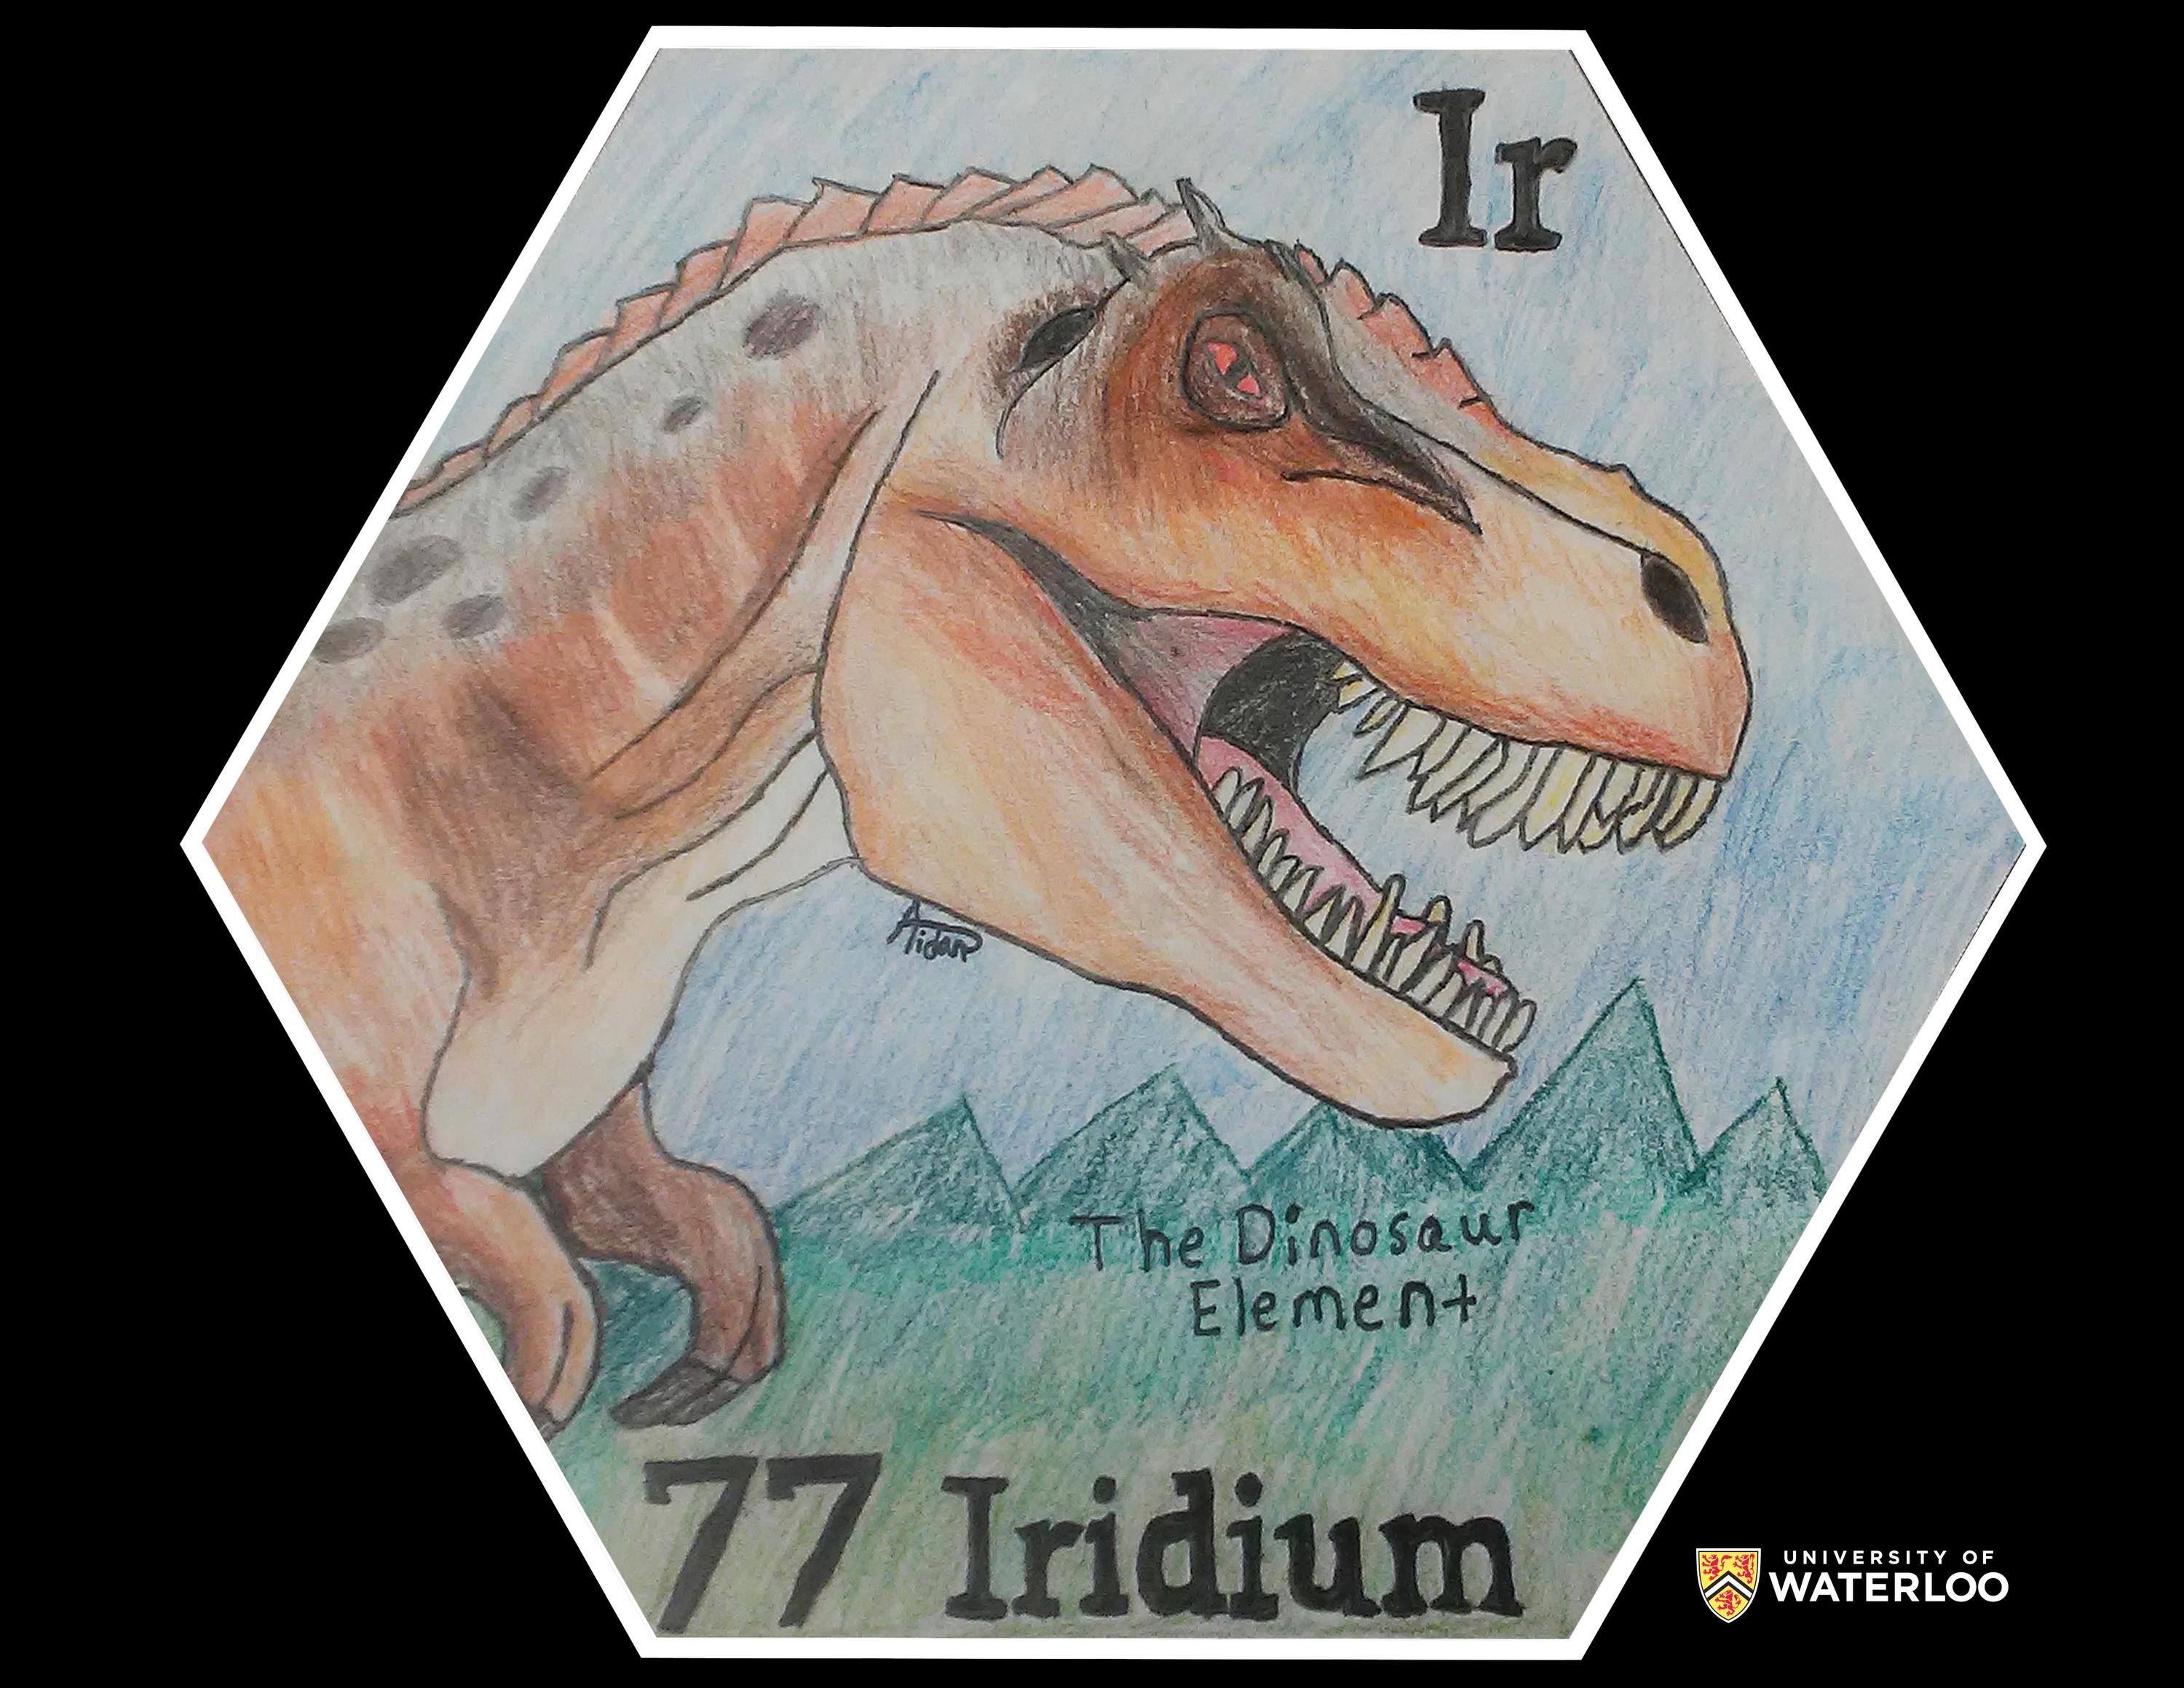 Coloured pencil on paper. A large tyrannosaurus rex centre in front of a mountain landscape and the words “The Dinosaur Element”. The chemical symbol “Ir” appears in the upper right corner. At the bottom are the atomic number “77” and “Iridium”.